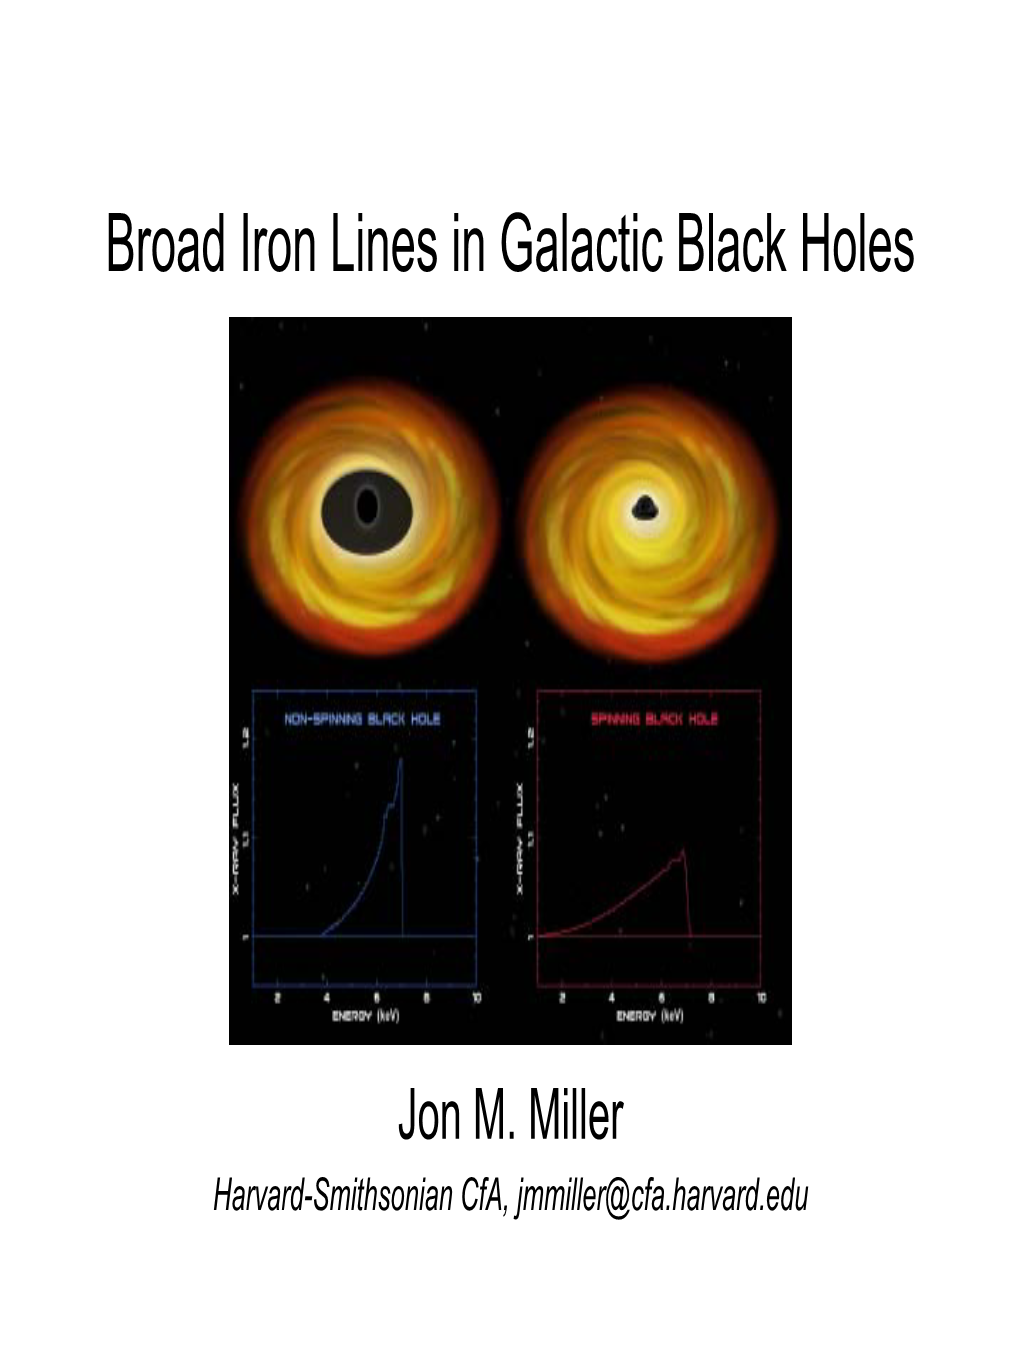 Broad Iron Lines in Galactic Black Holes